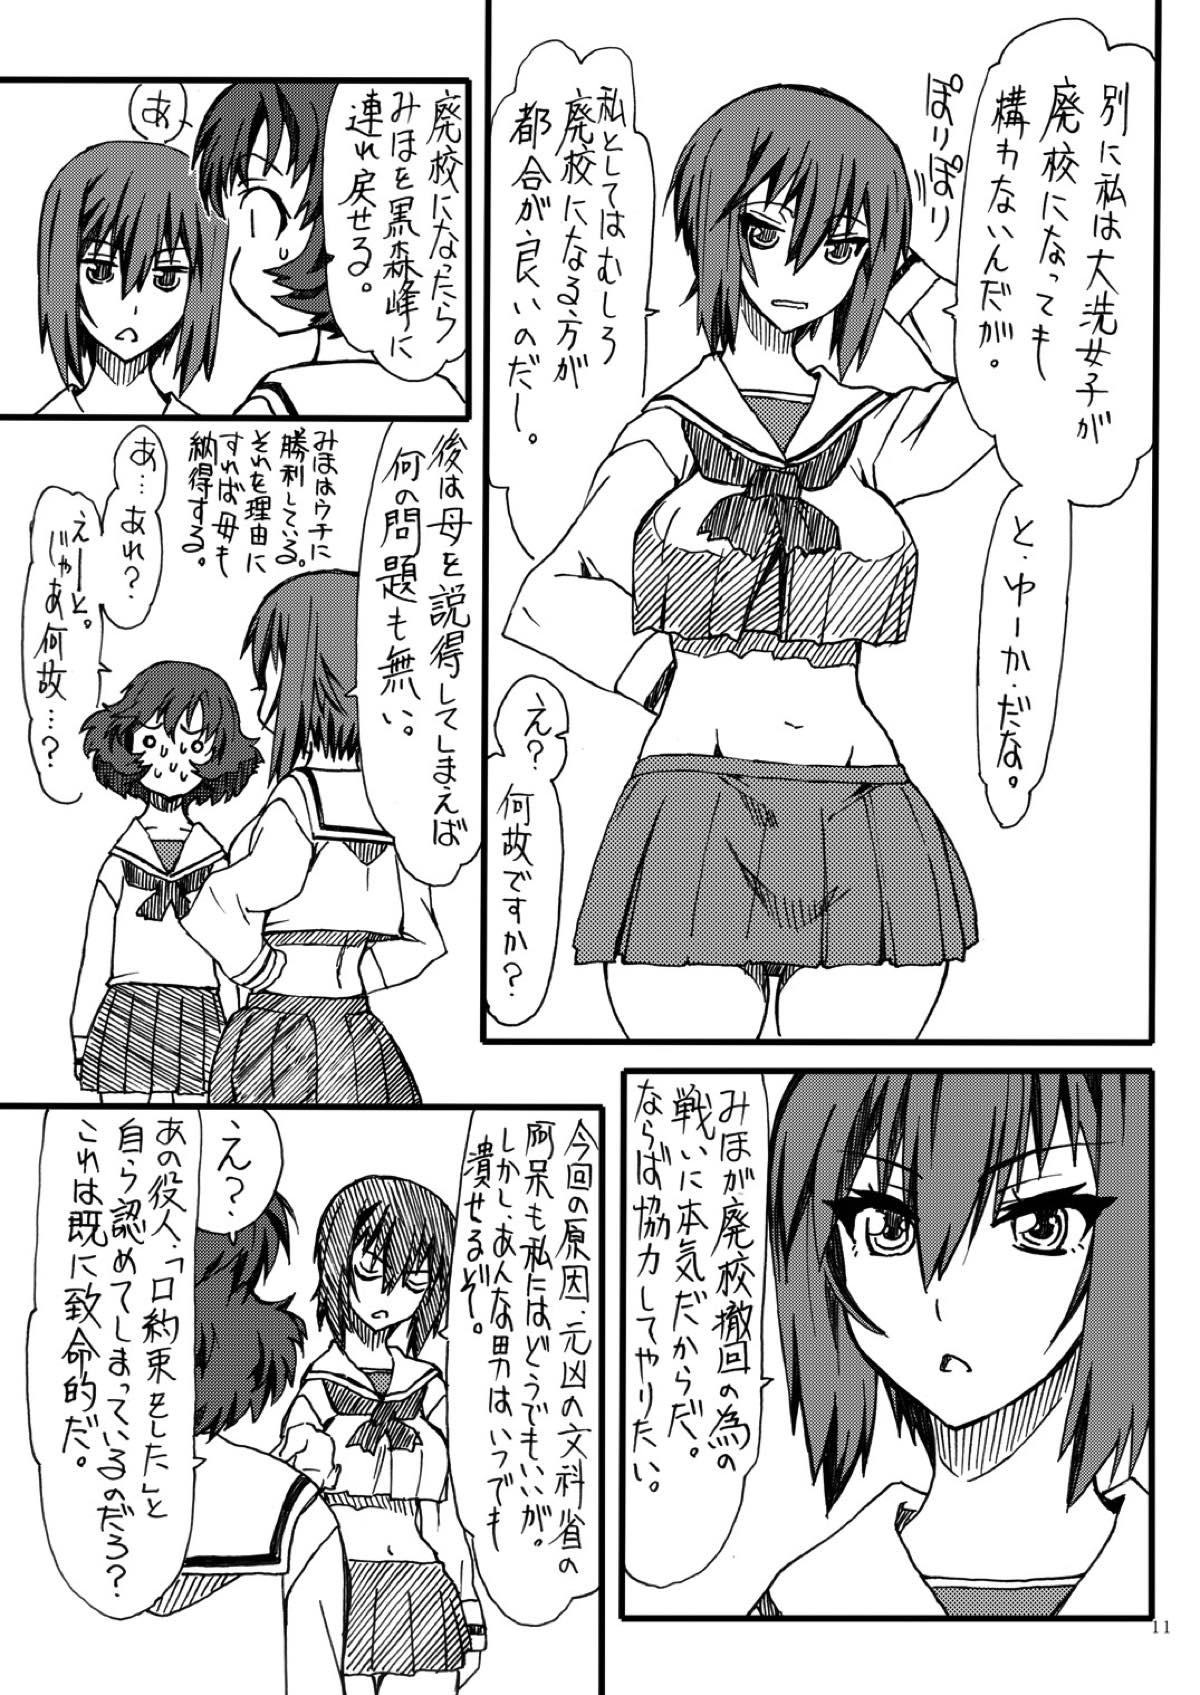 Amateur MahoPan 2 - Girls und panzer Monster - Page 10